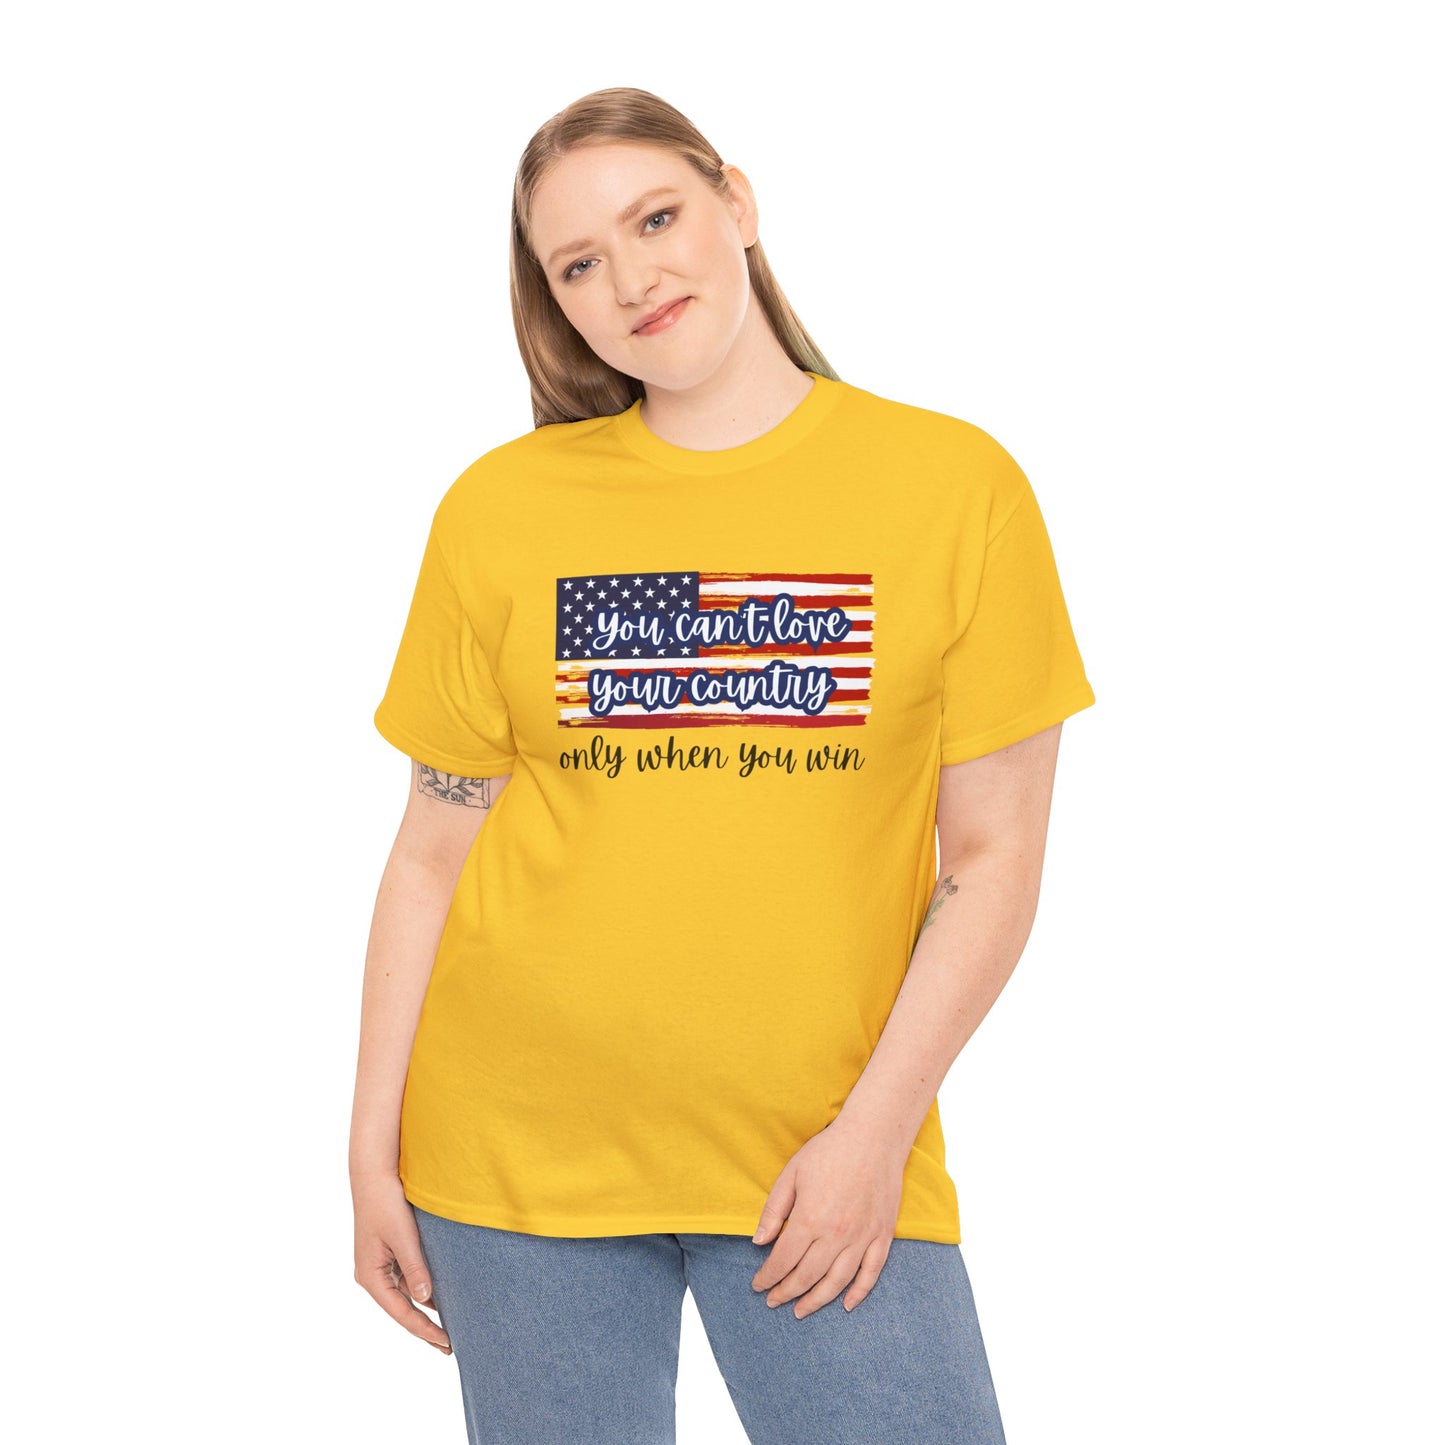 You can't love your country only when you win t-shirt, pro truth, democracy and democratic ideals, American Flag waving t-shirt, America Tee